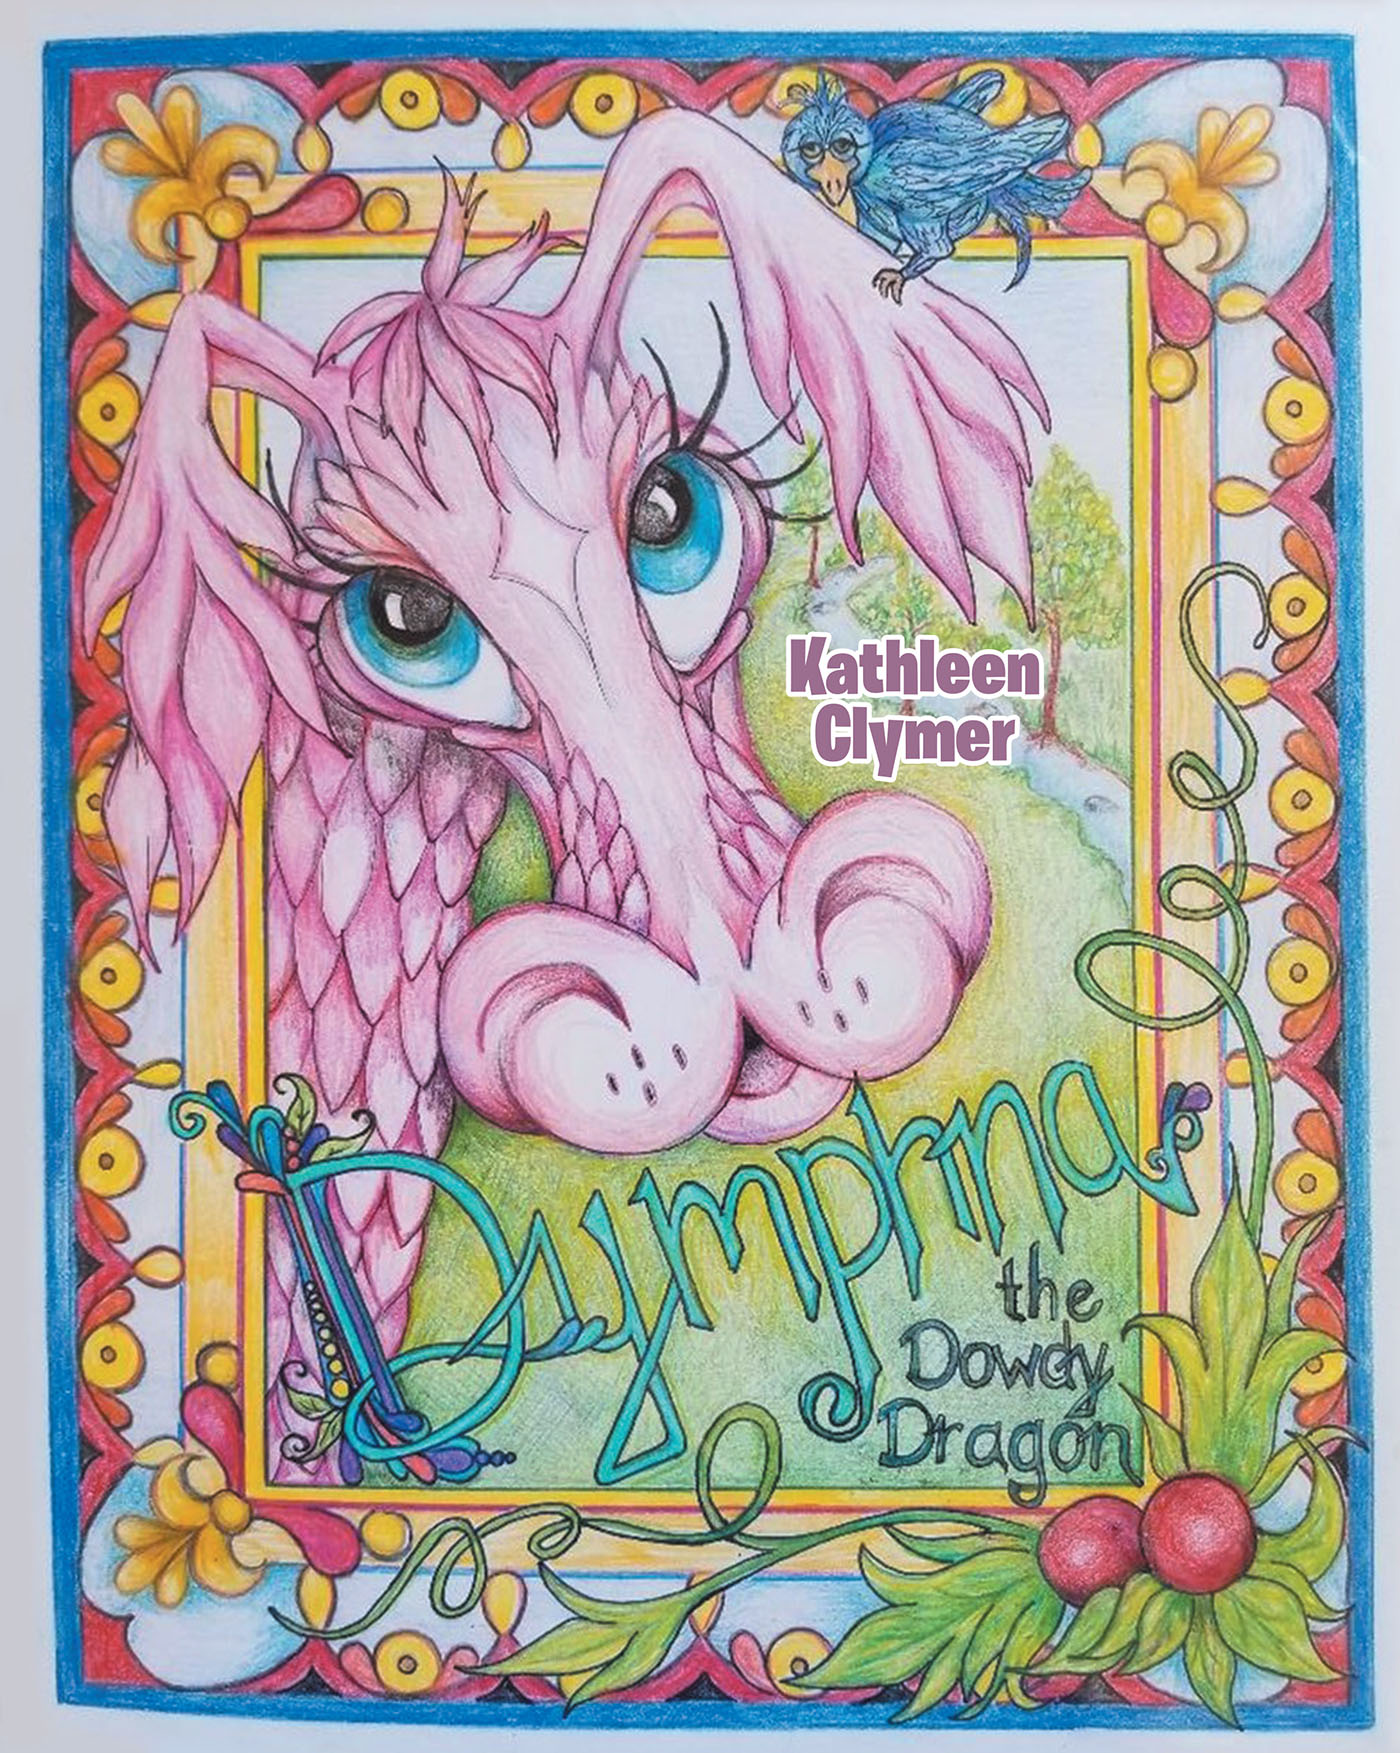 Kathleen Clymer’s New Book, "Dymphna the Dowdy Dragon," Follows the Adventures of an Unhappy Dragon Who Strikes Out on Her Own to Find Others That Will Accept Her